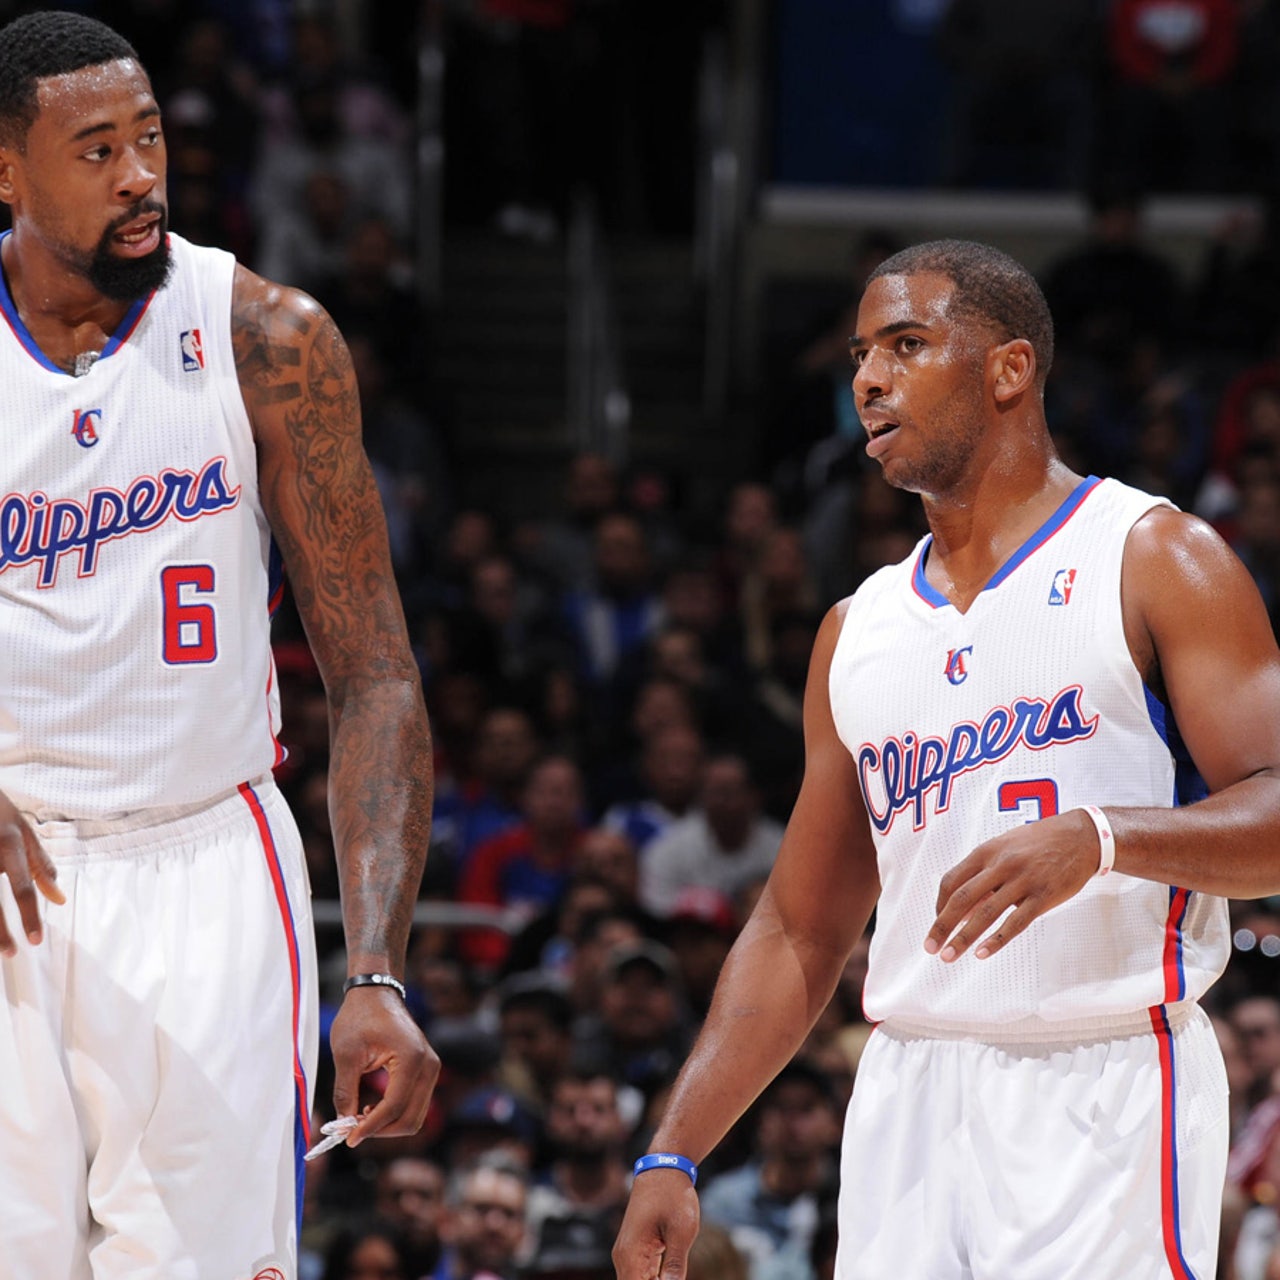 DeAndre Jordan aims to bring energy from start in Sixers' Game 2 vs. Miami